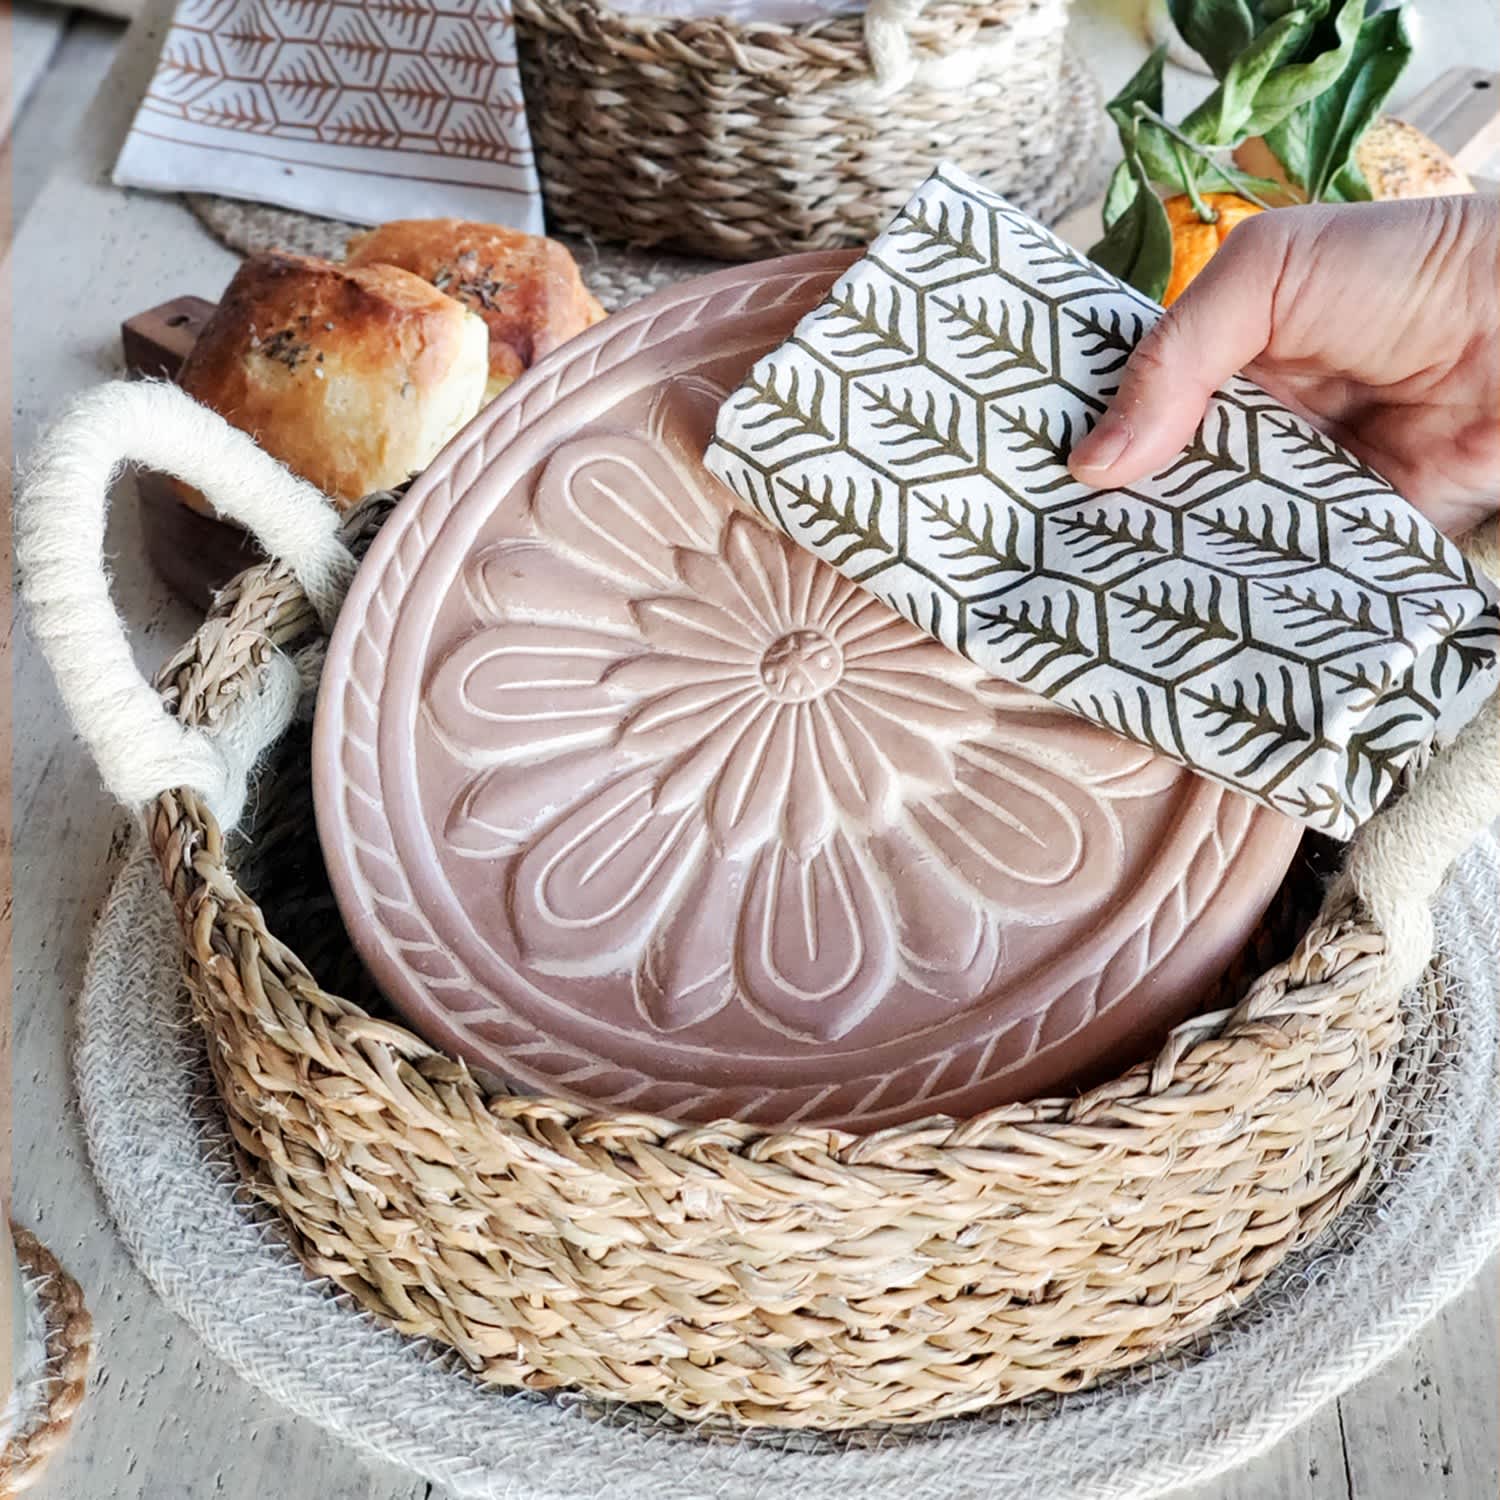 https://res.cloudinary.com/wolfandbadger/image/upload/s--pIj7G2xD--/q_auto:eco/products/bread-warmer-basket-gift-set-with-dark-brown-tea-towel-vintage-flower__a30f8a40fcad220e559bd9cb6e87982b